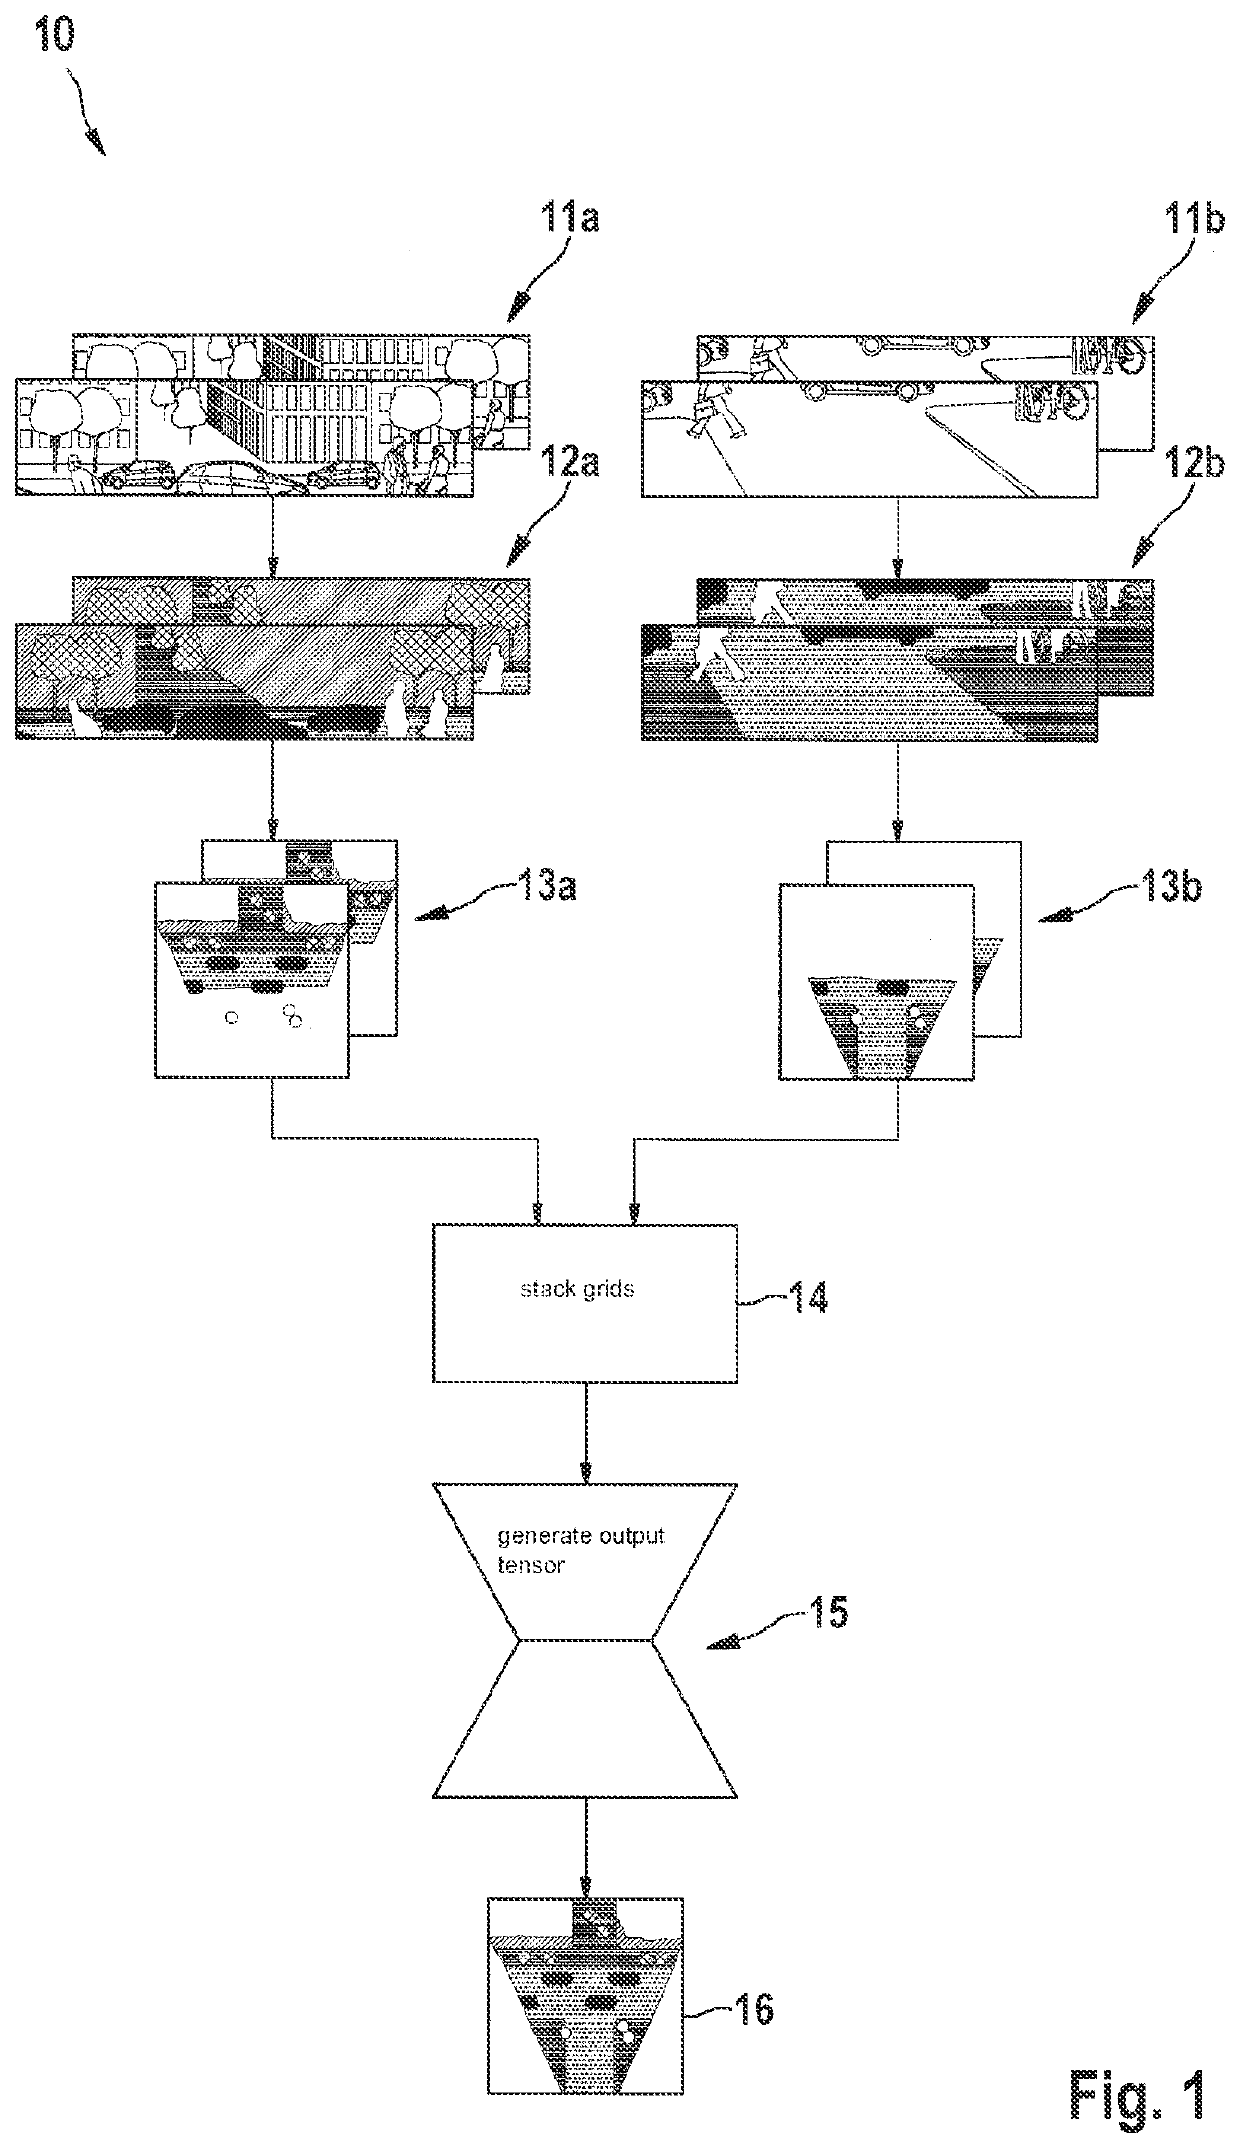 Method for representing an environment of a mobile platform